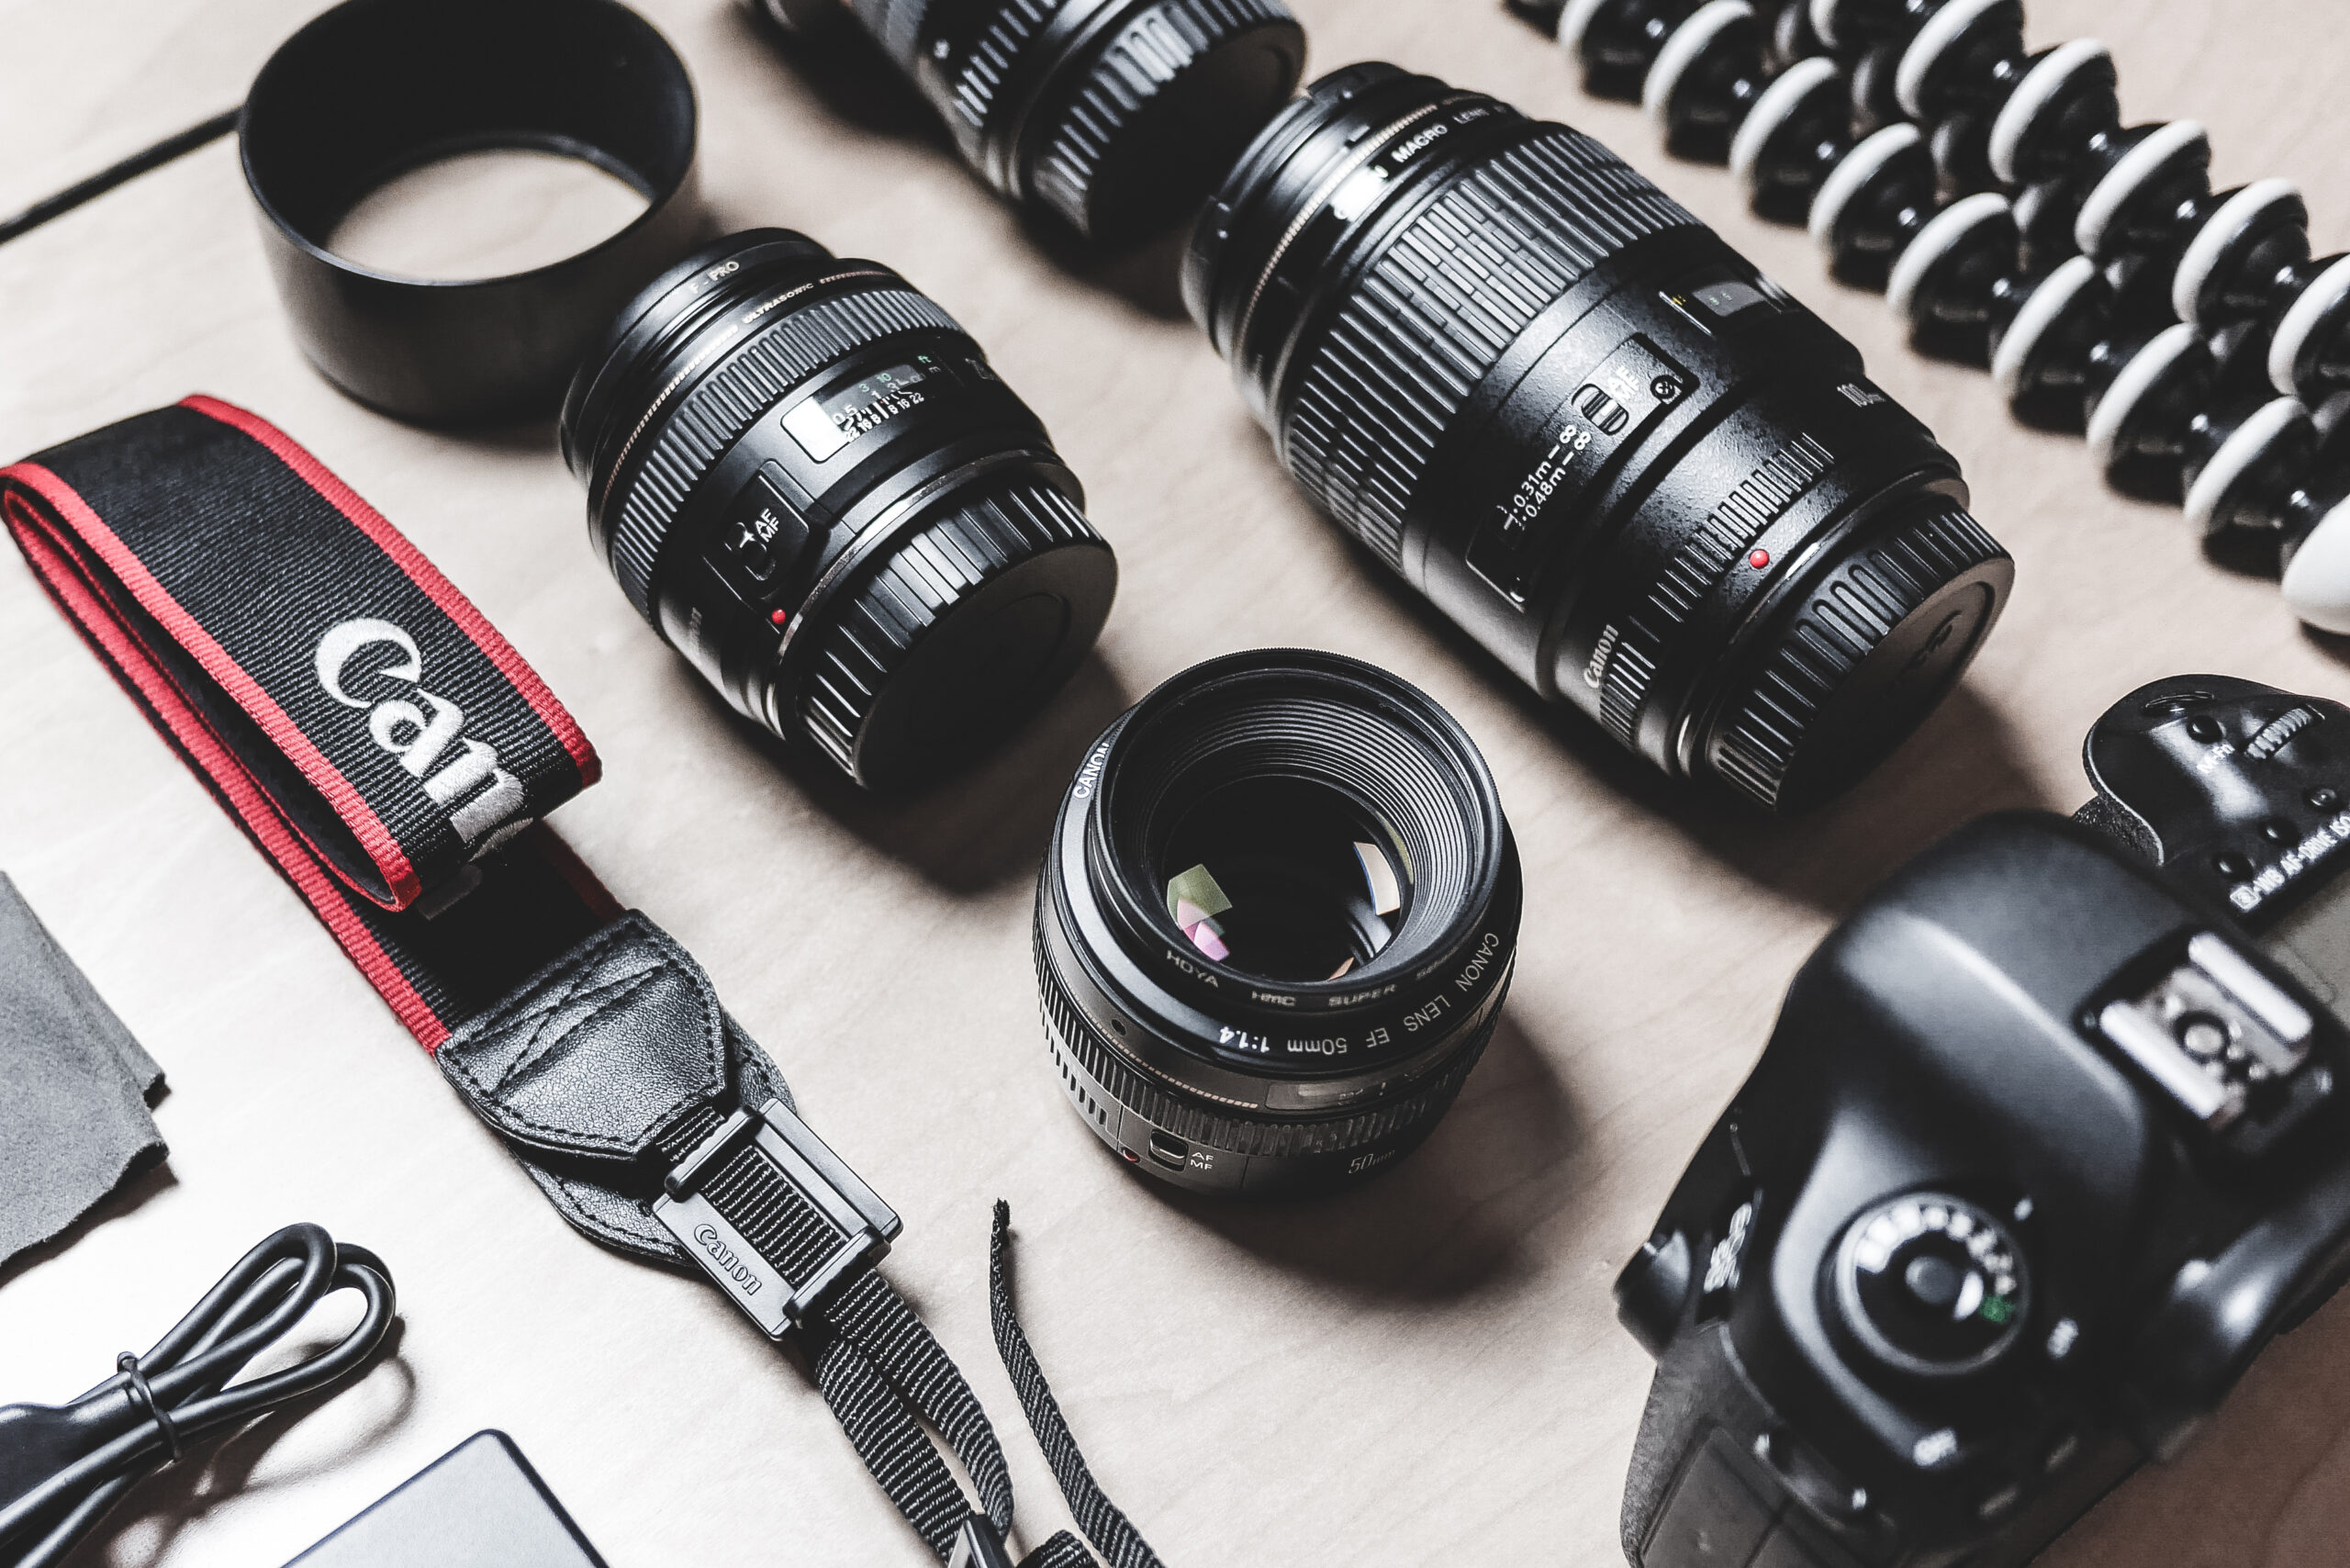 How To Use DSLR Camera - Step By Step Guide